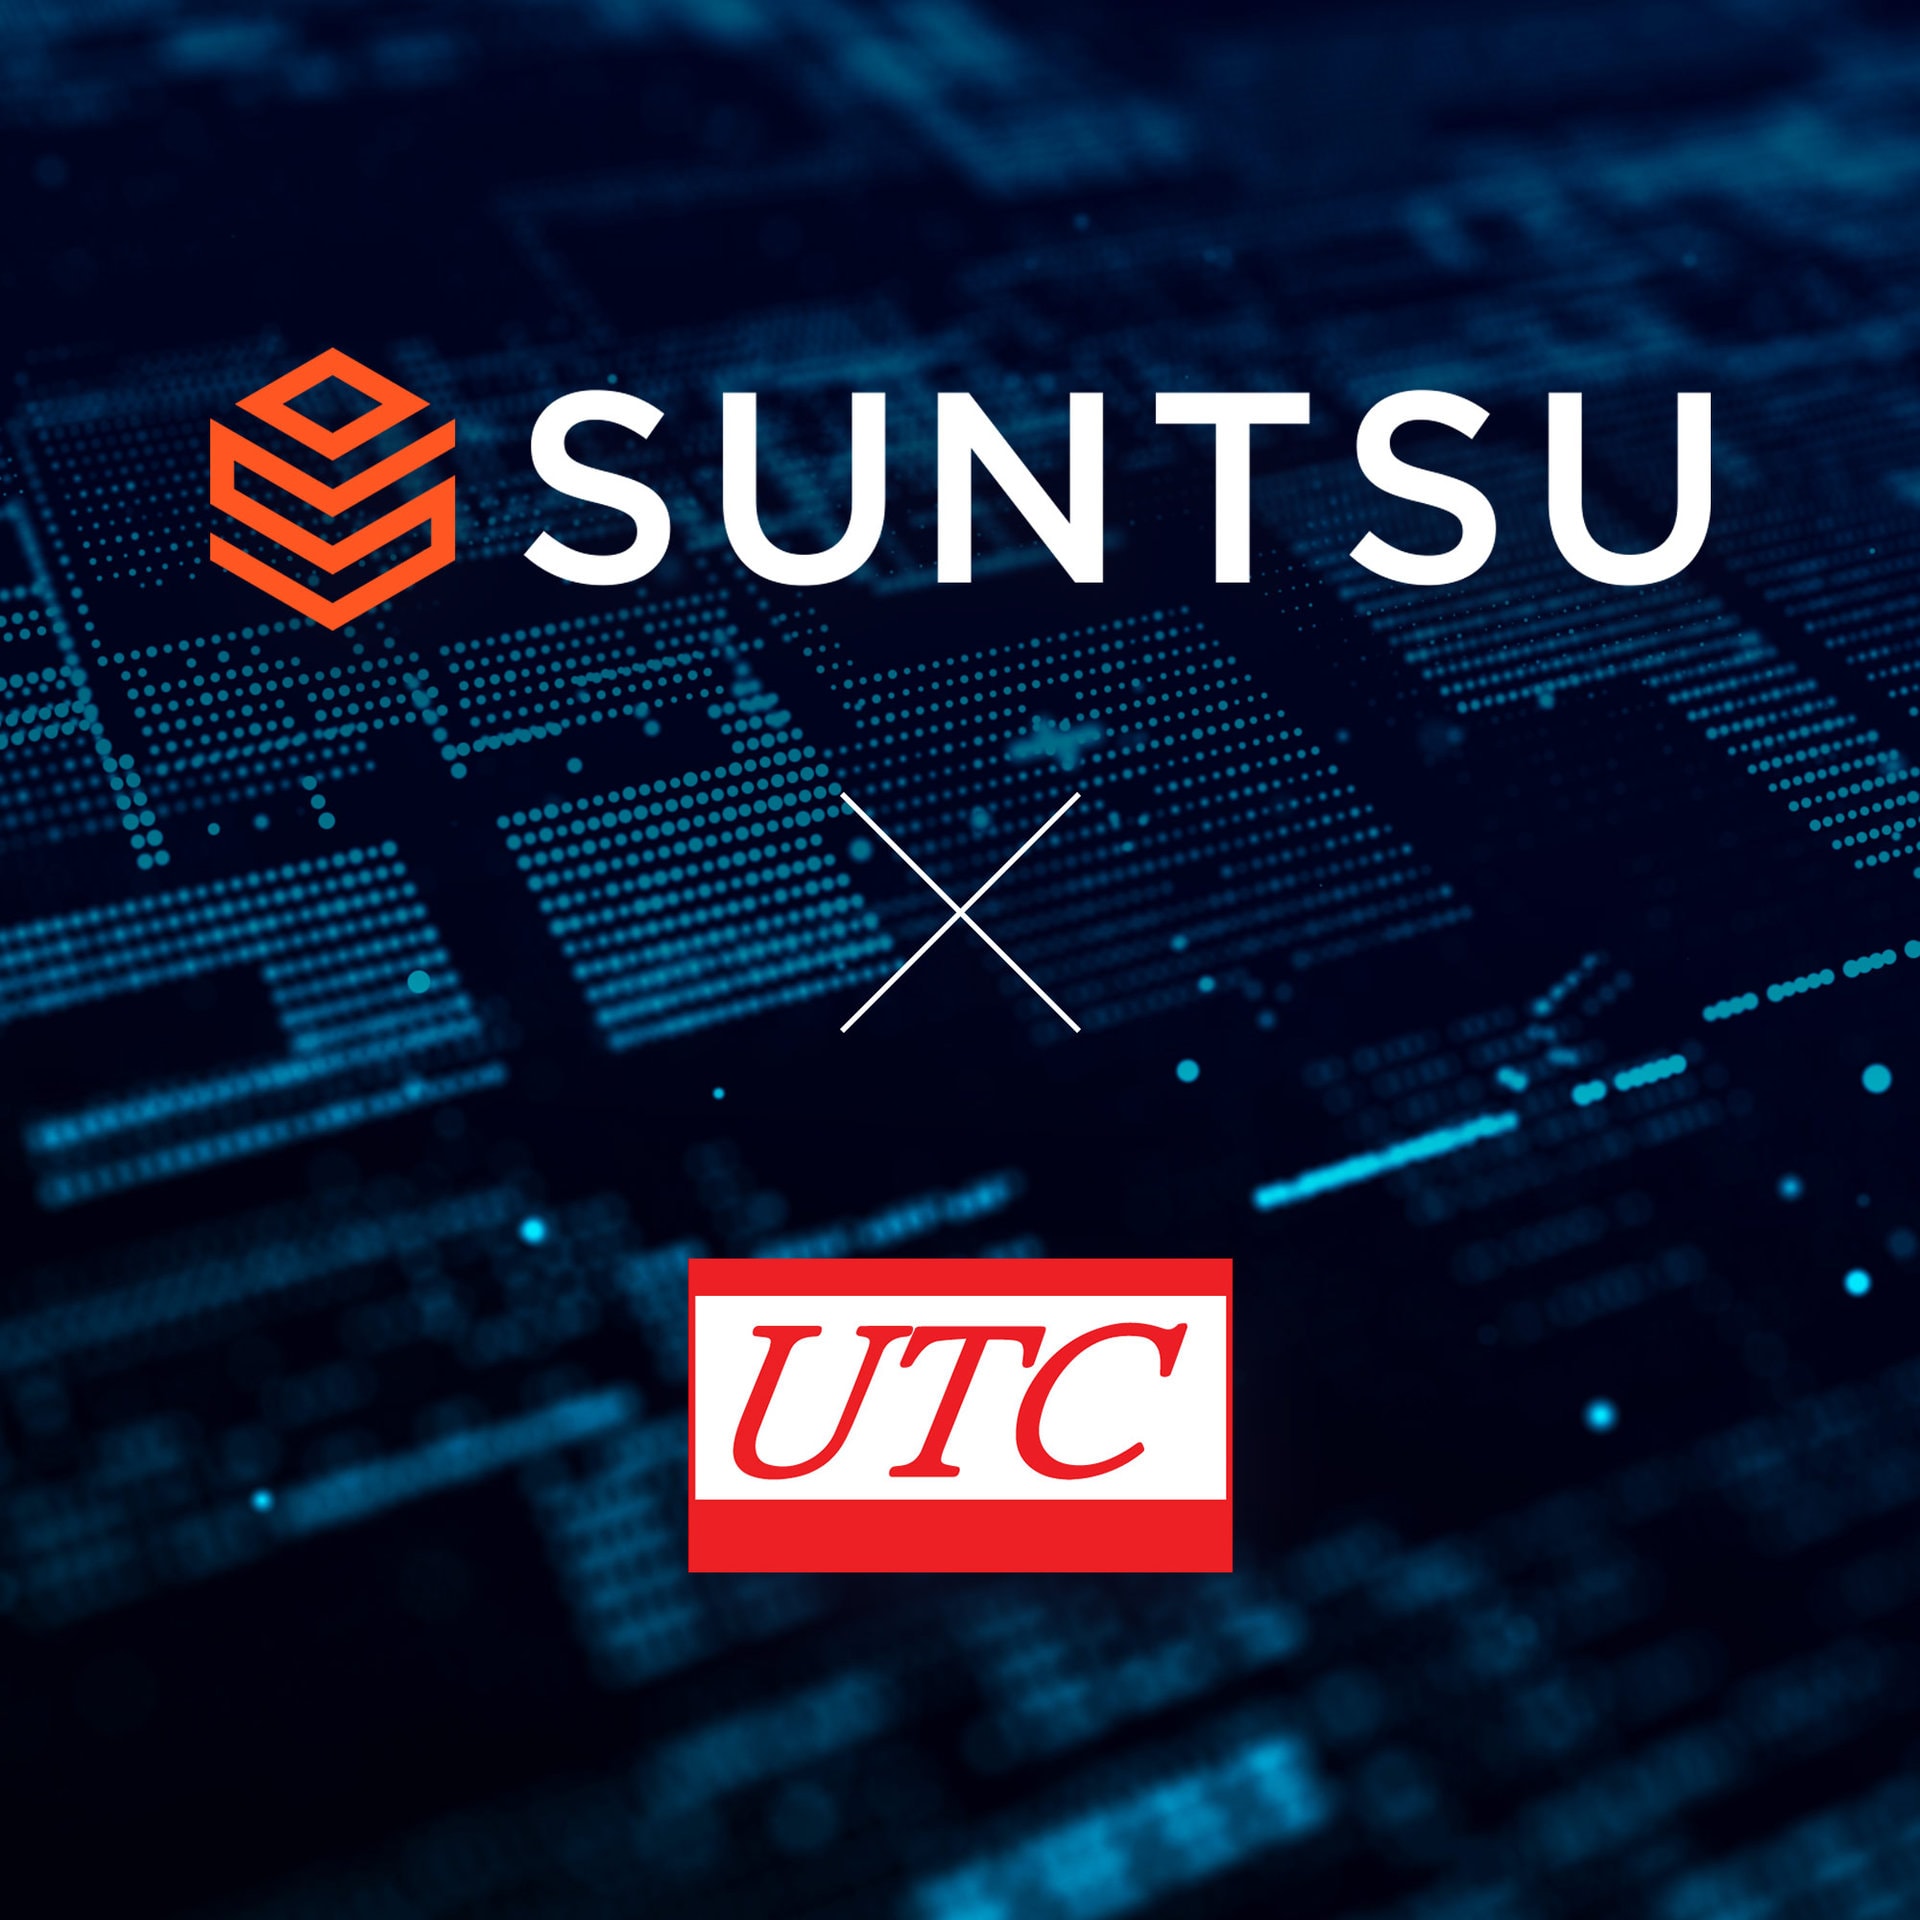 Suntsu and Unisonic Partner to Cut Lead Times on IC’s & Discrete Components!